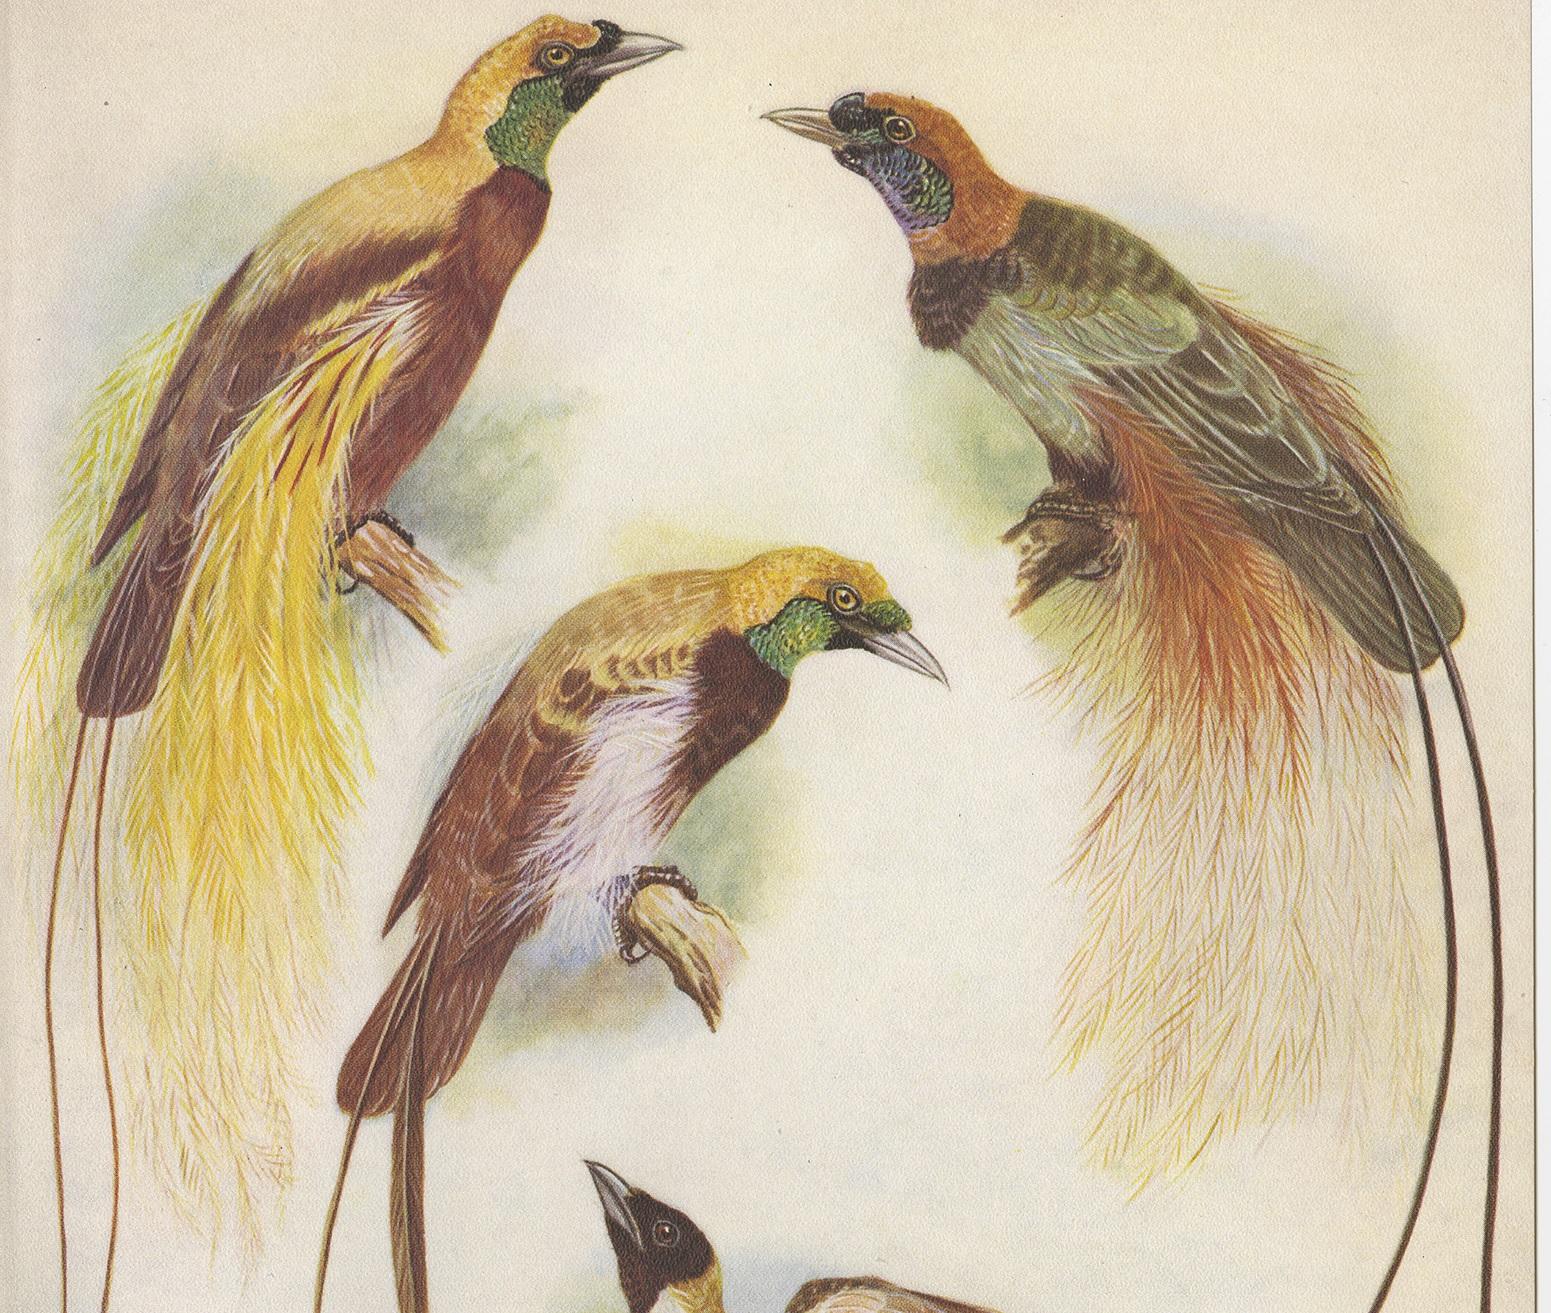 Decorative print illustrating the Blood's Bird of Paradise and the Lesser Bird of Paradise. This authentic print originates from 'Birds of Paradise and Bower Birds' by Tom Iredale. With colored illustrations of every species by Lilian Medland.